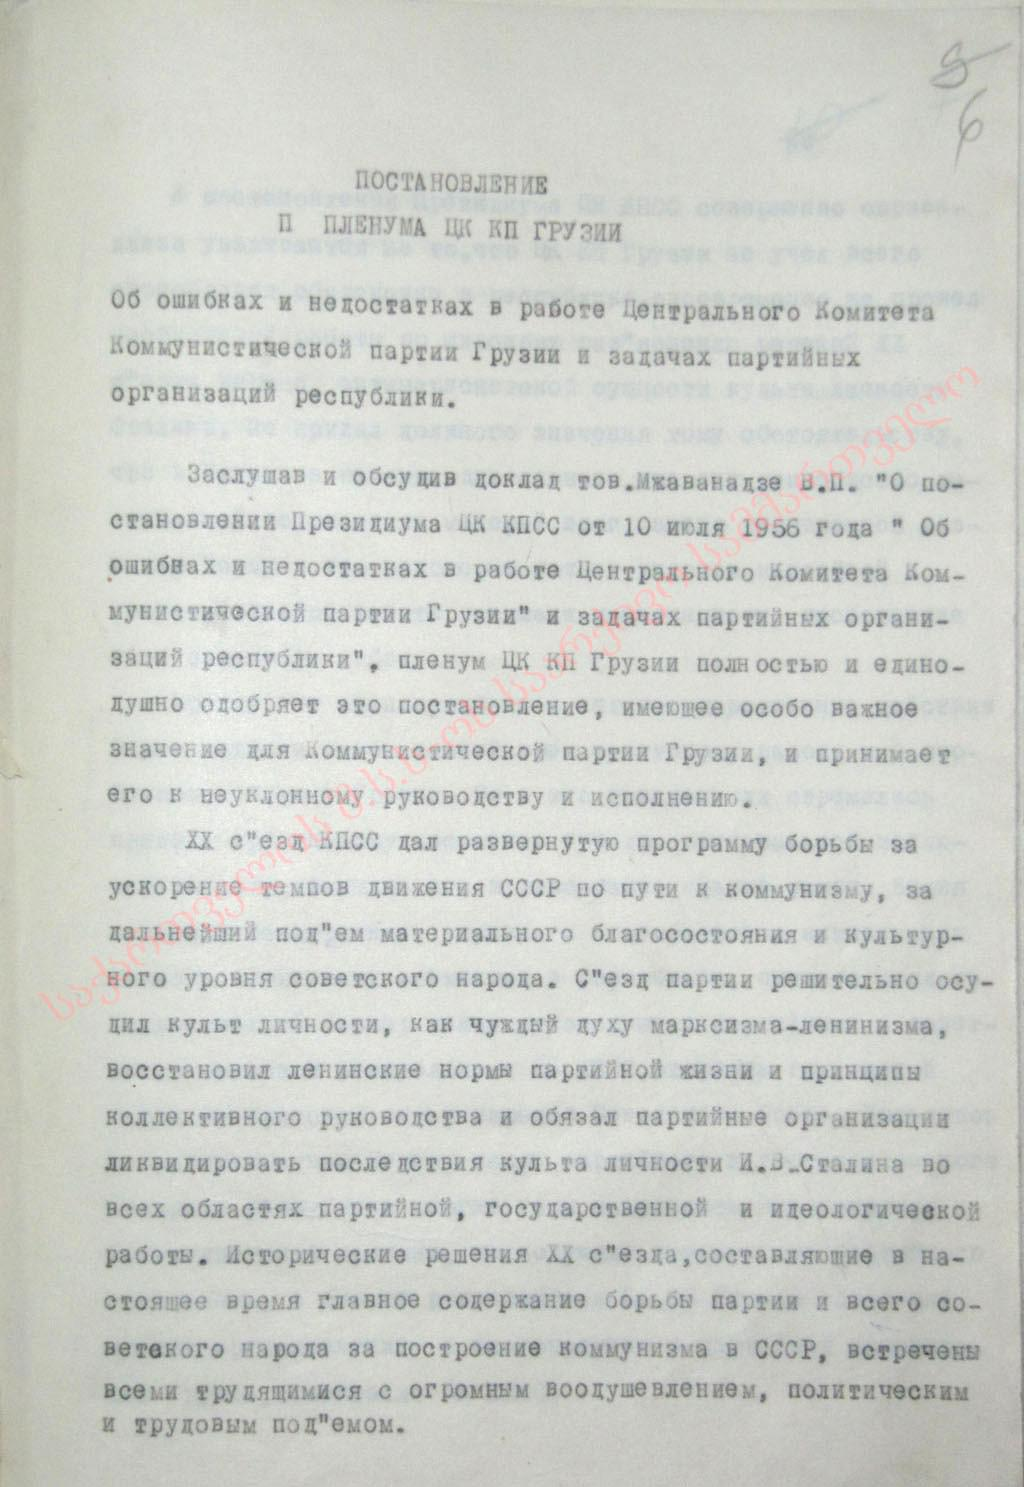 Protocol of 2nd plenary session of Central Committee of Communist Party of Georgia of August 6, 1956. 